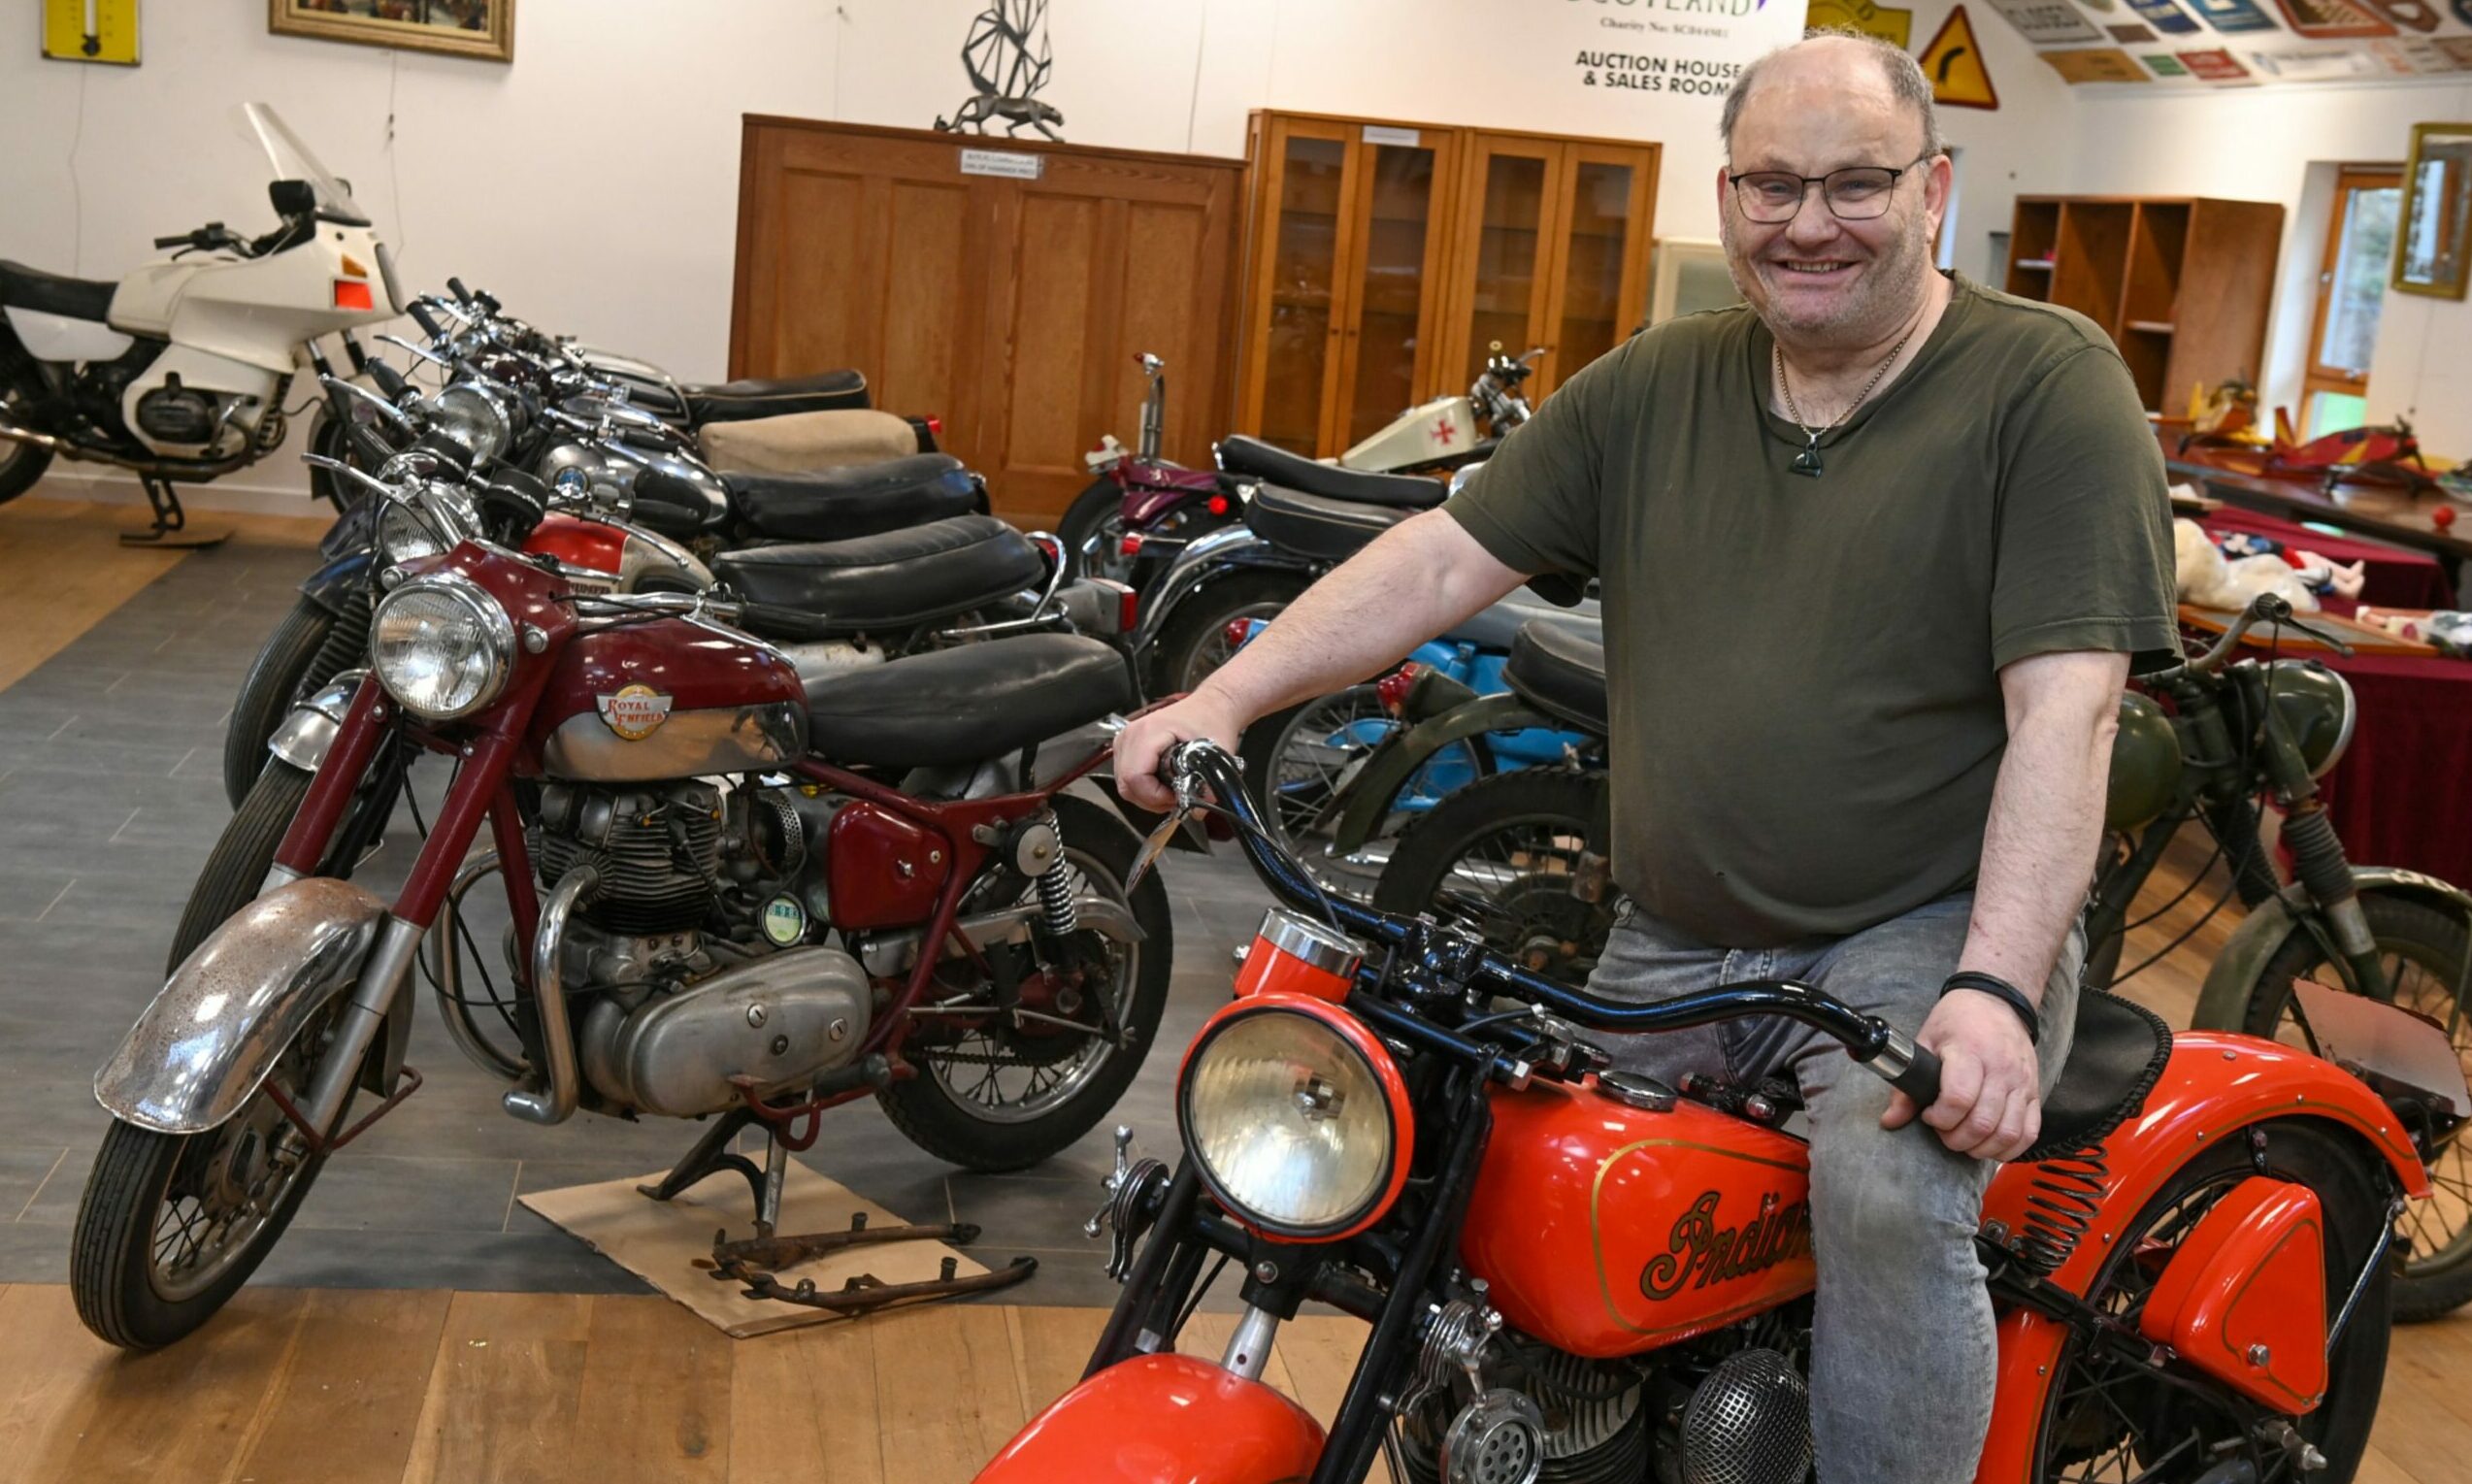 Clive atop the "rare as hens' teeth" Indian Scout, to be sold on December 29. Image: Kenny Elrick/ DC Thomson